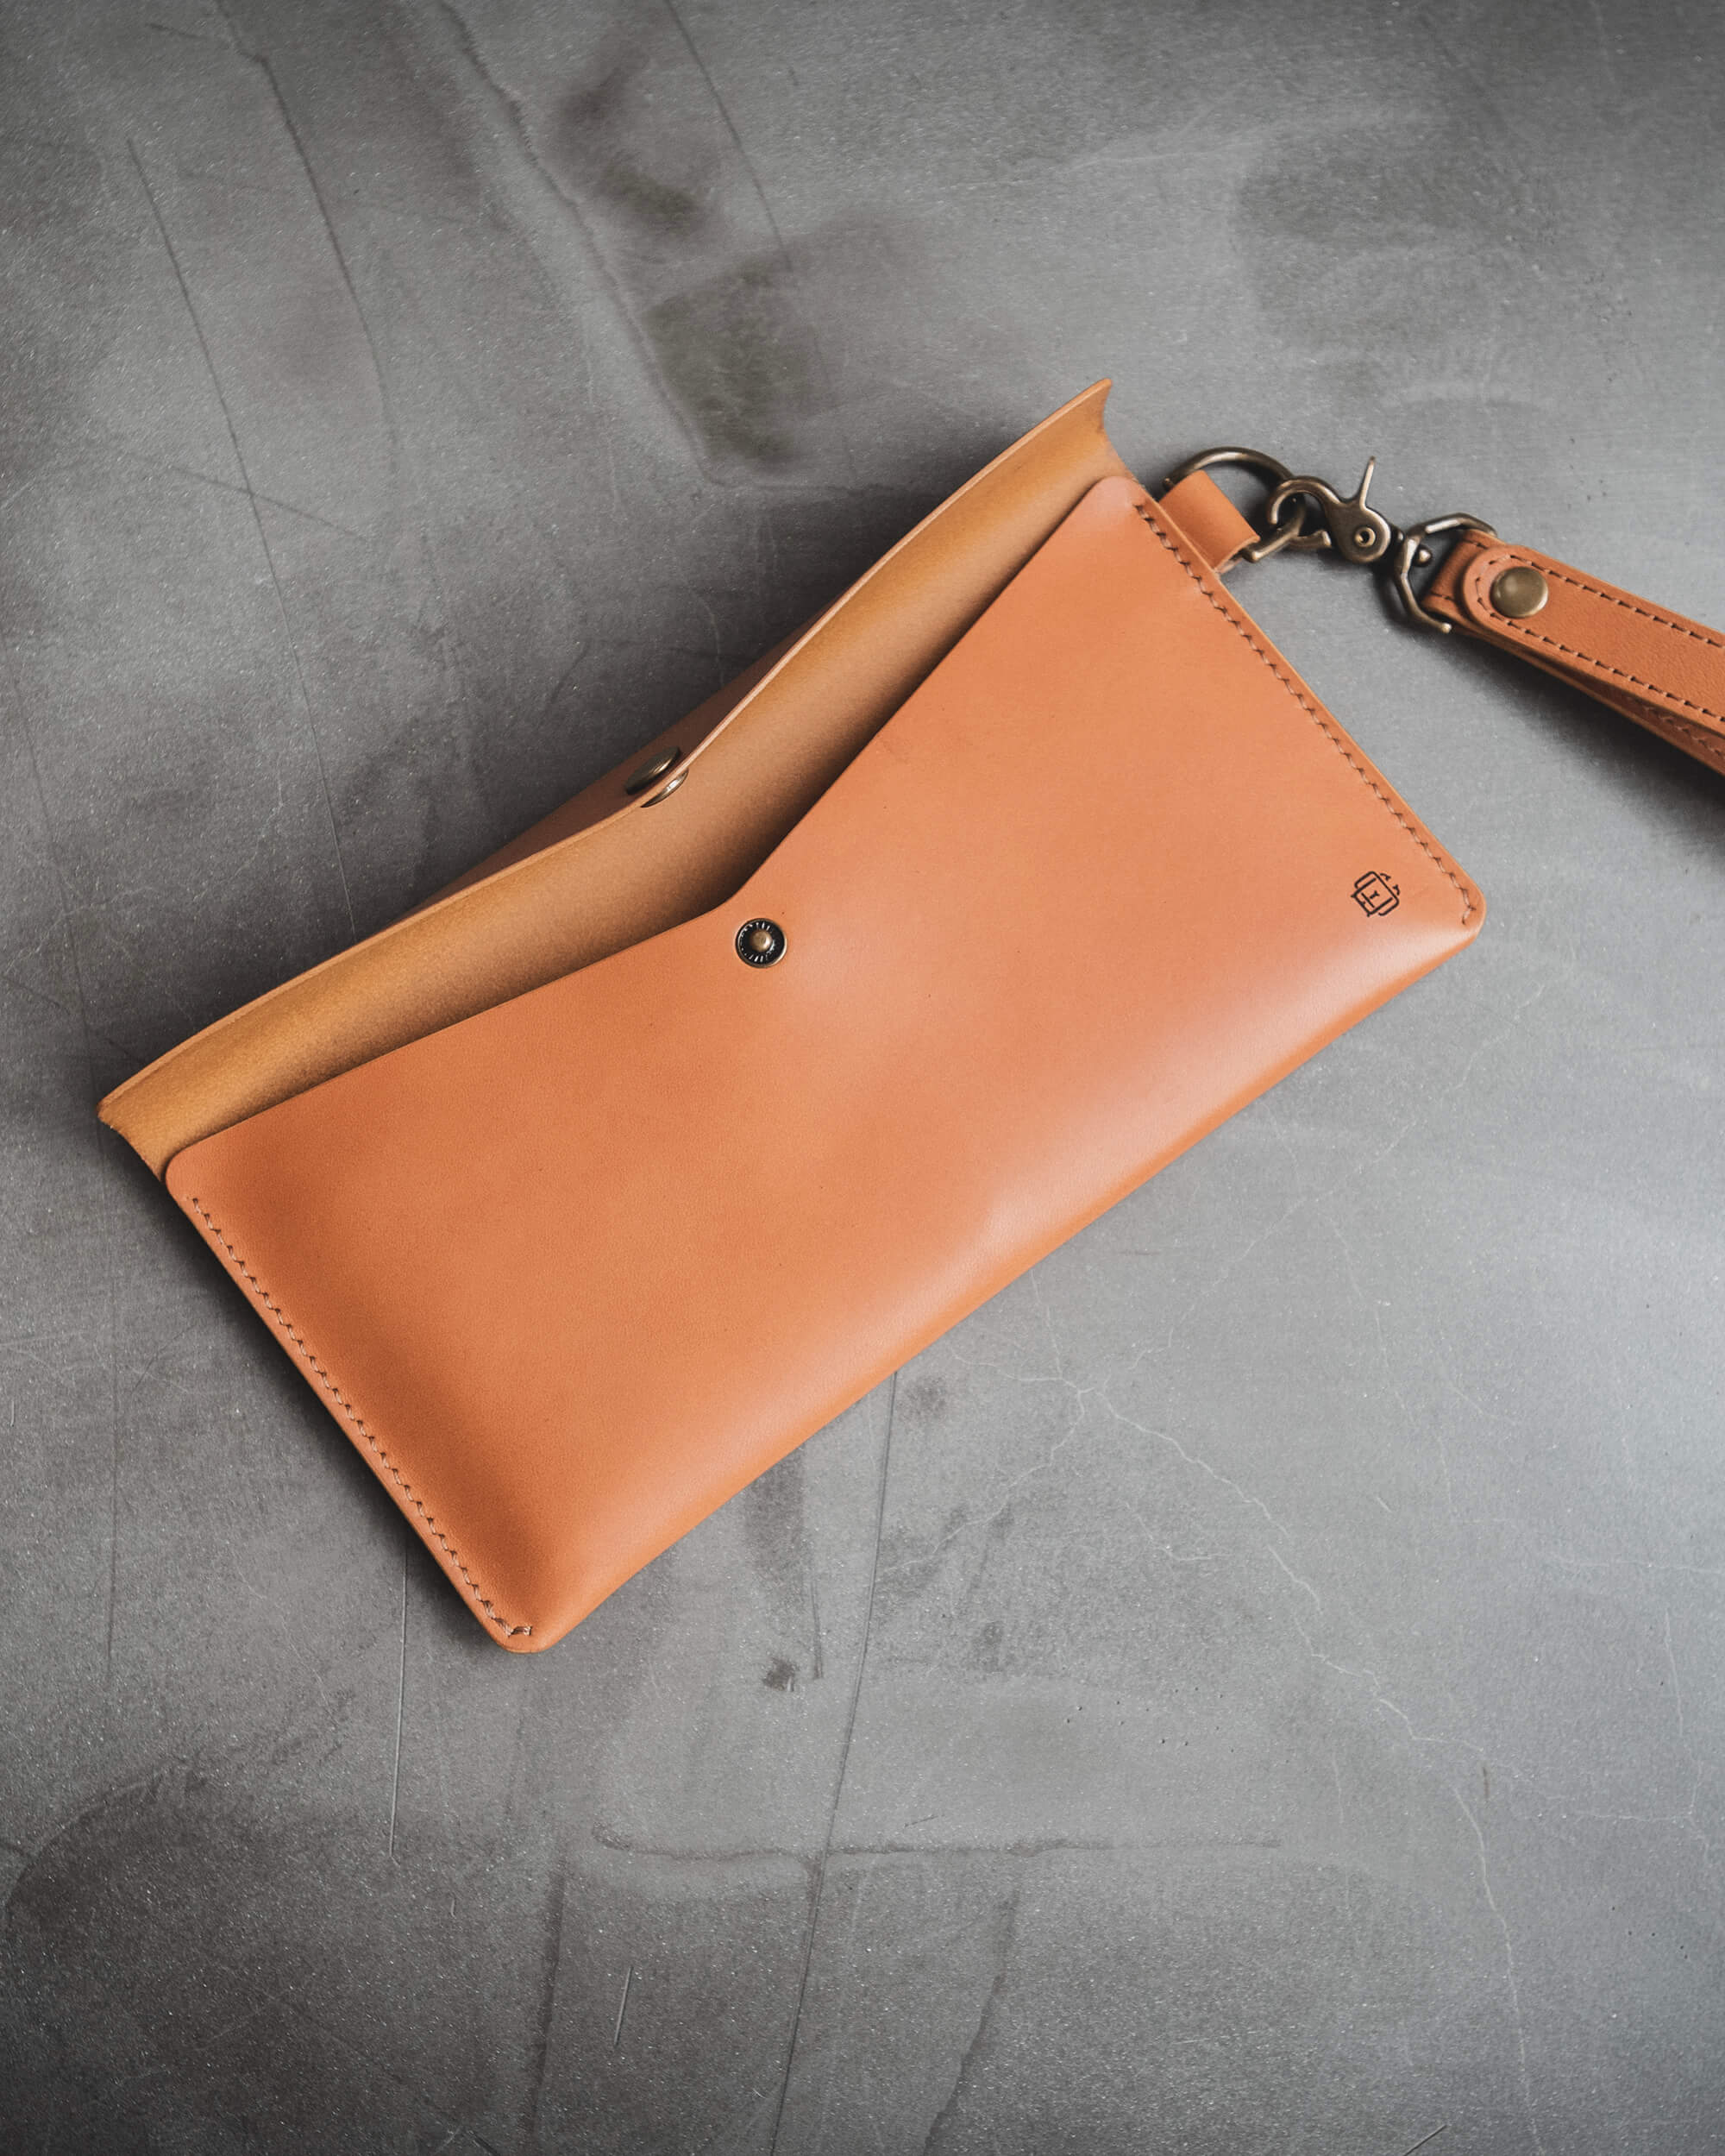 Leather Clutch with Wide Leather Veg Band or Money Bag